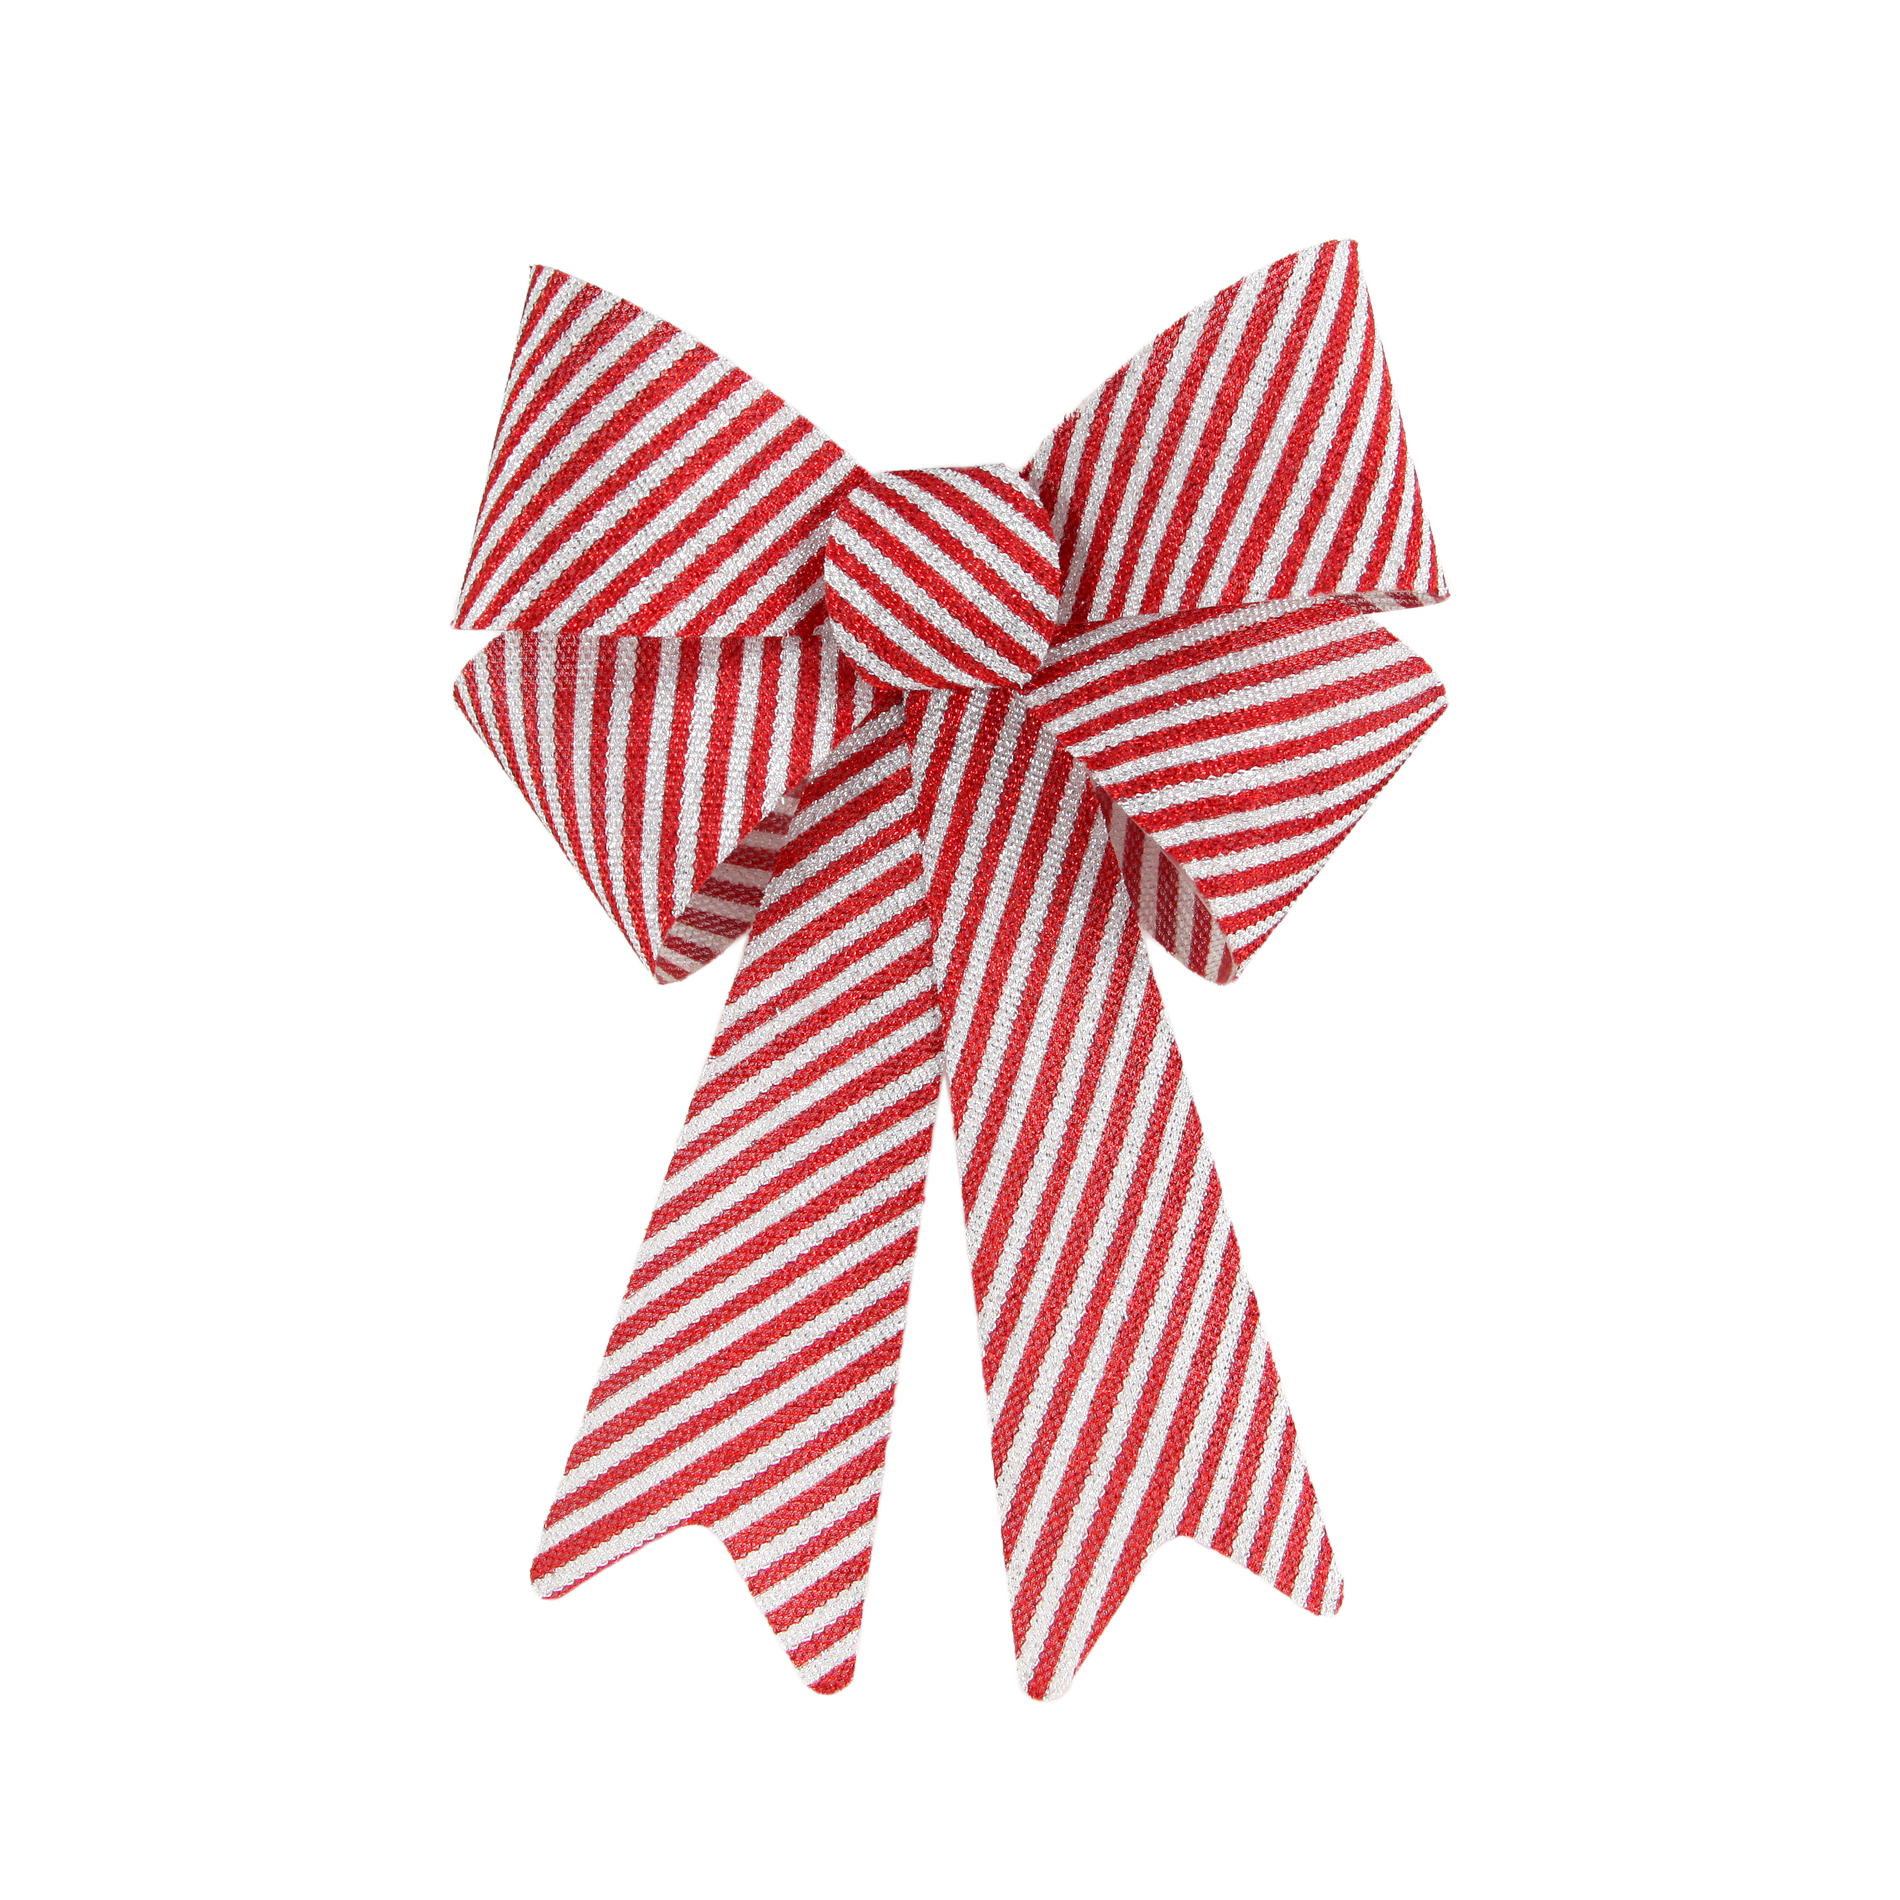 Trimming Traditions Tinsel Bow Red and Silver, 18 in. x 15 in.